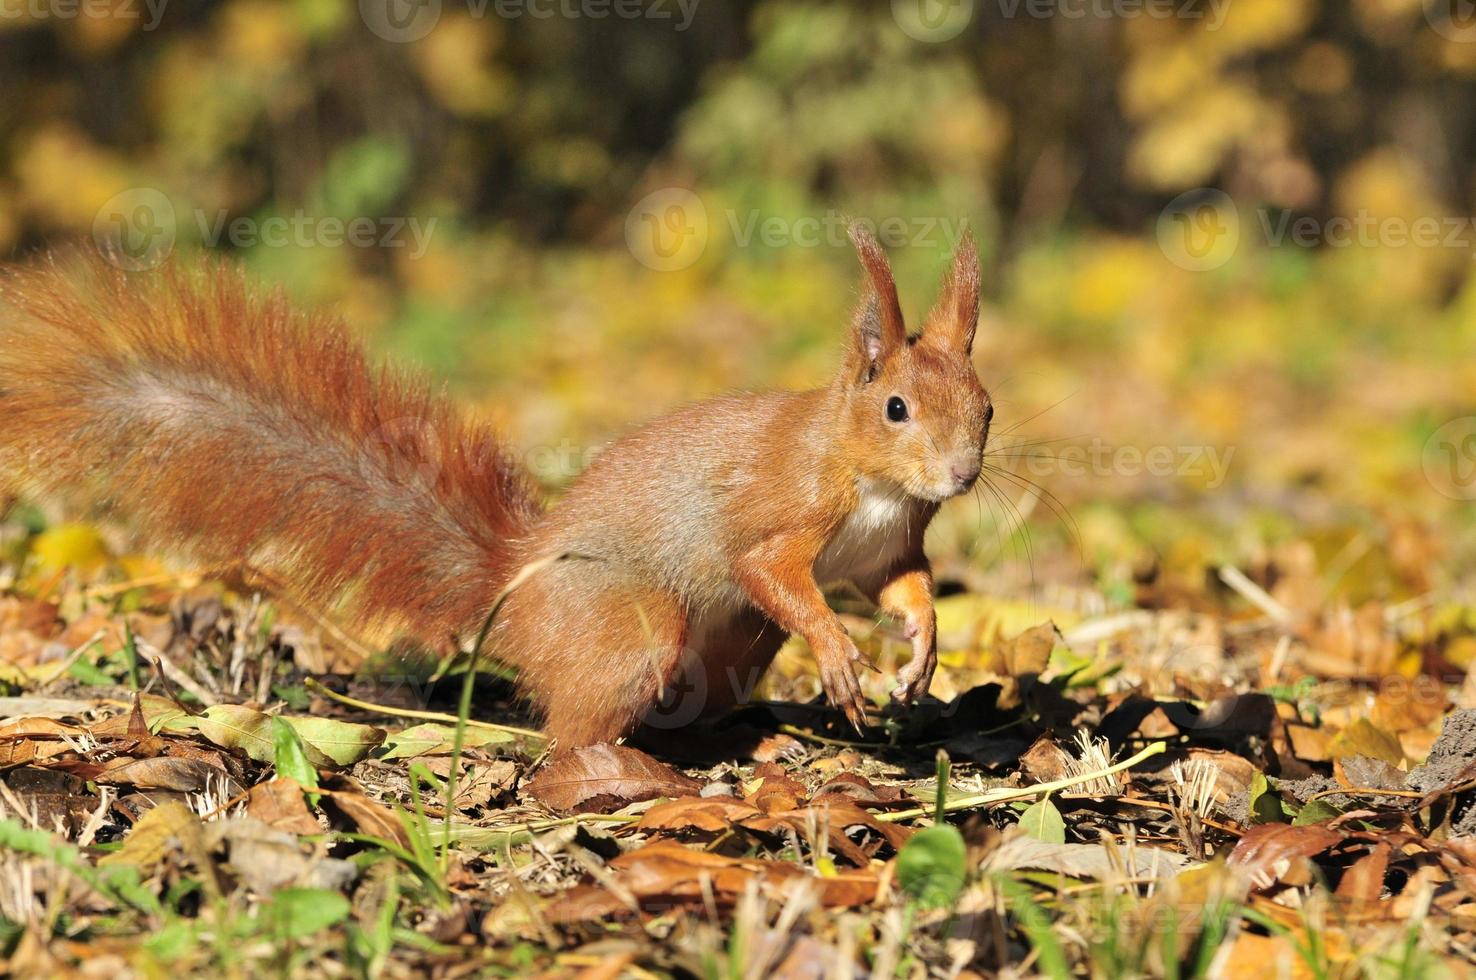 Squirrel - a rodent of the squirrel family. photo